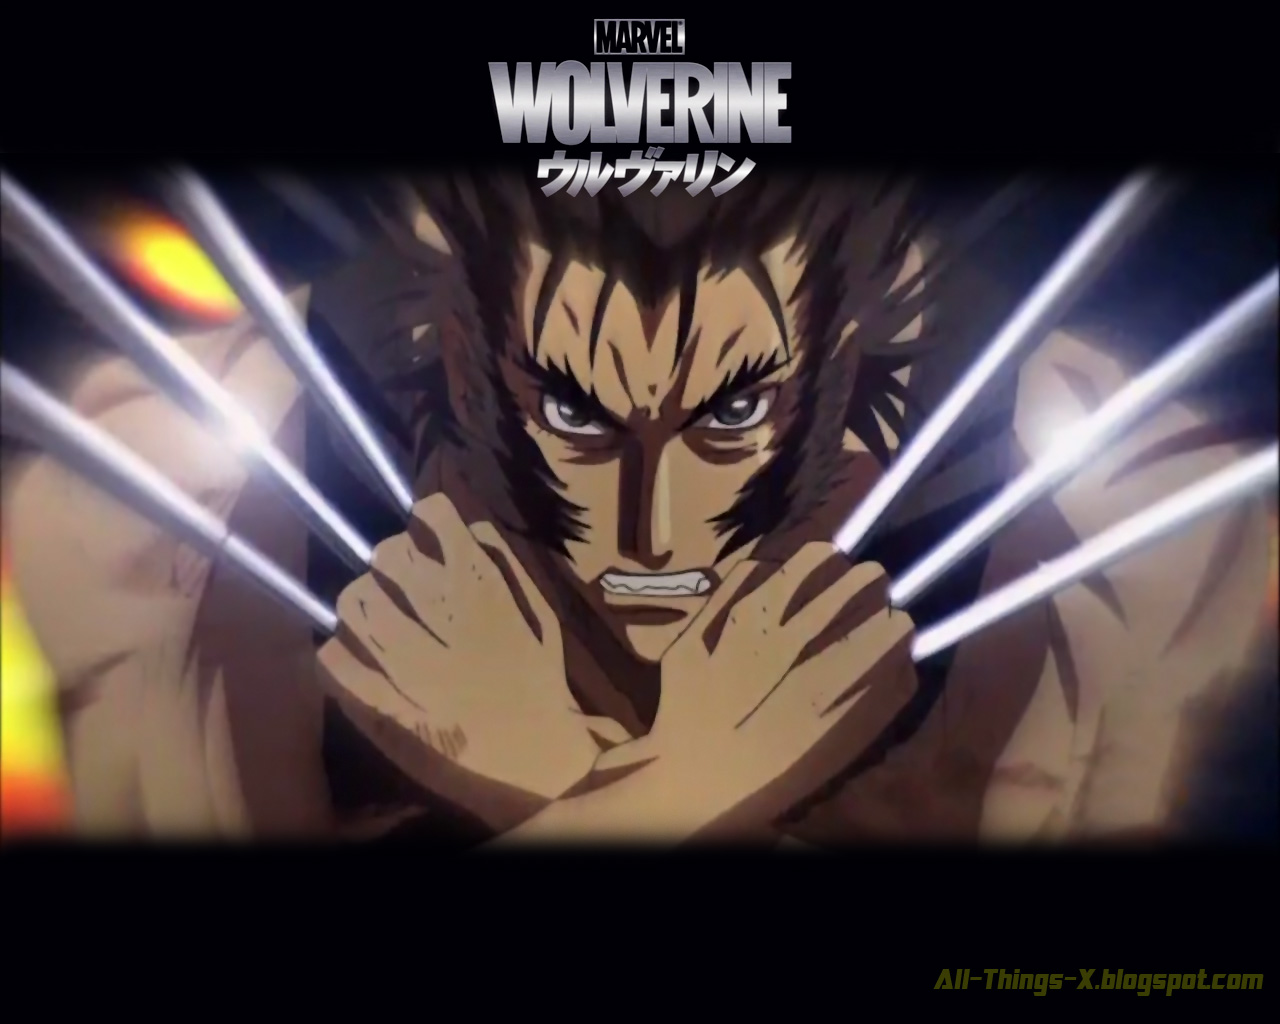 ... the Wolverine anime villains?? They deserve their own wallpapers too